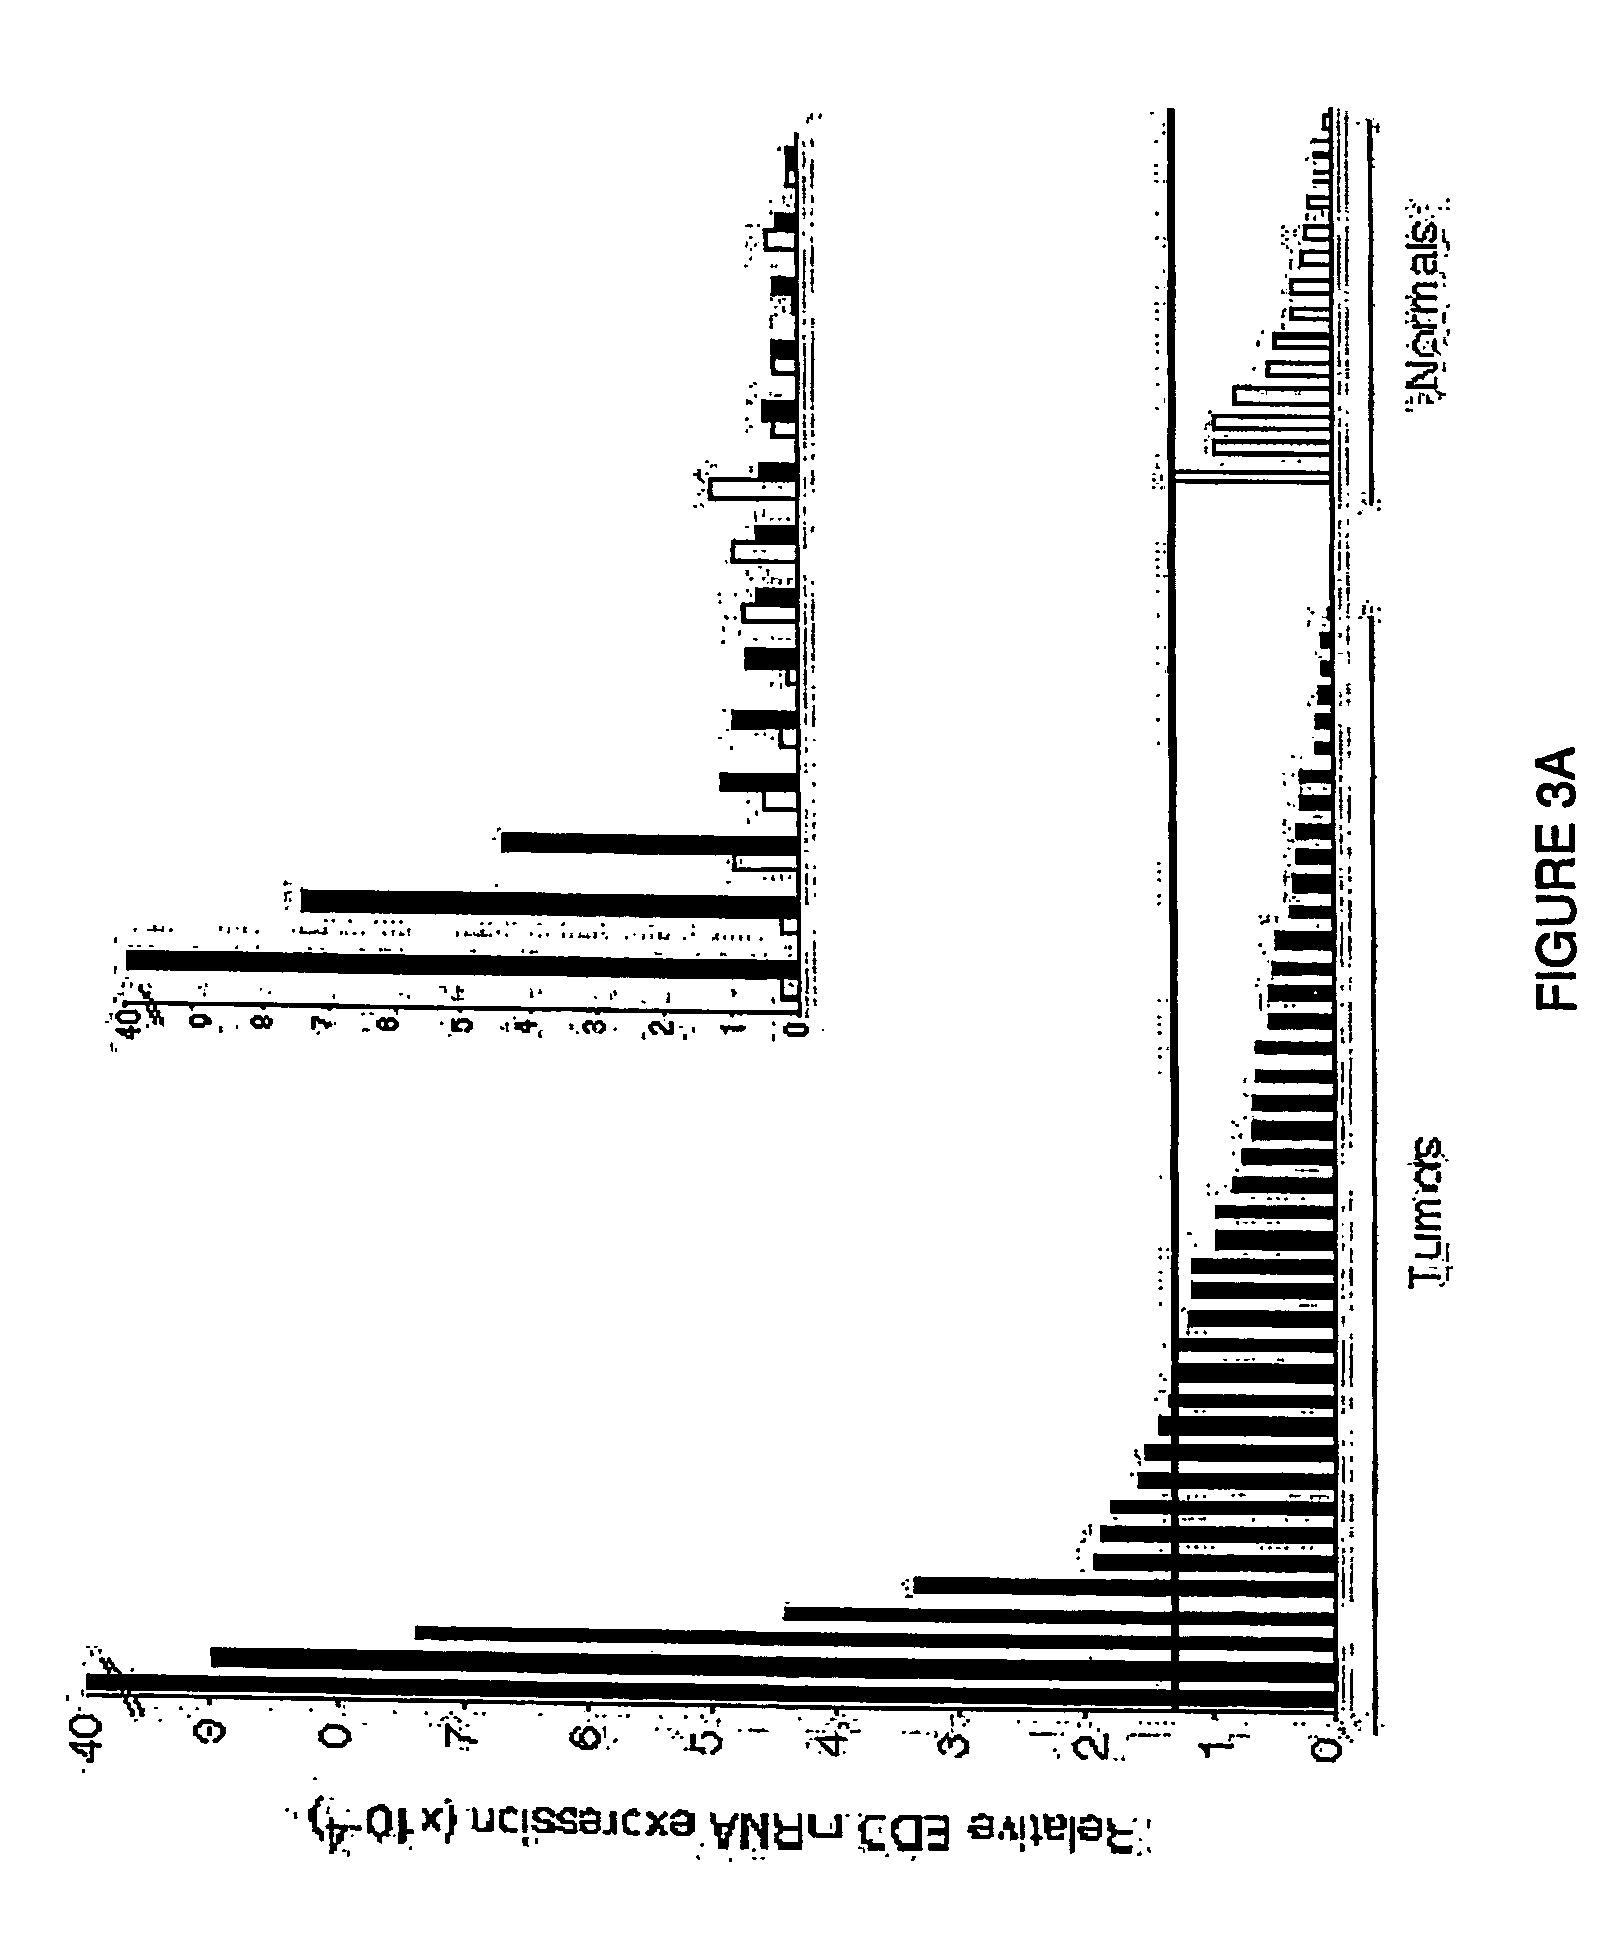 Novel diagnostic and therapeutic methods and reagents therefor